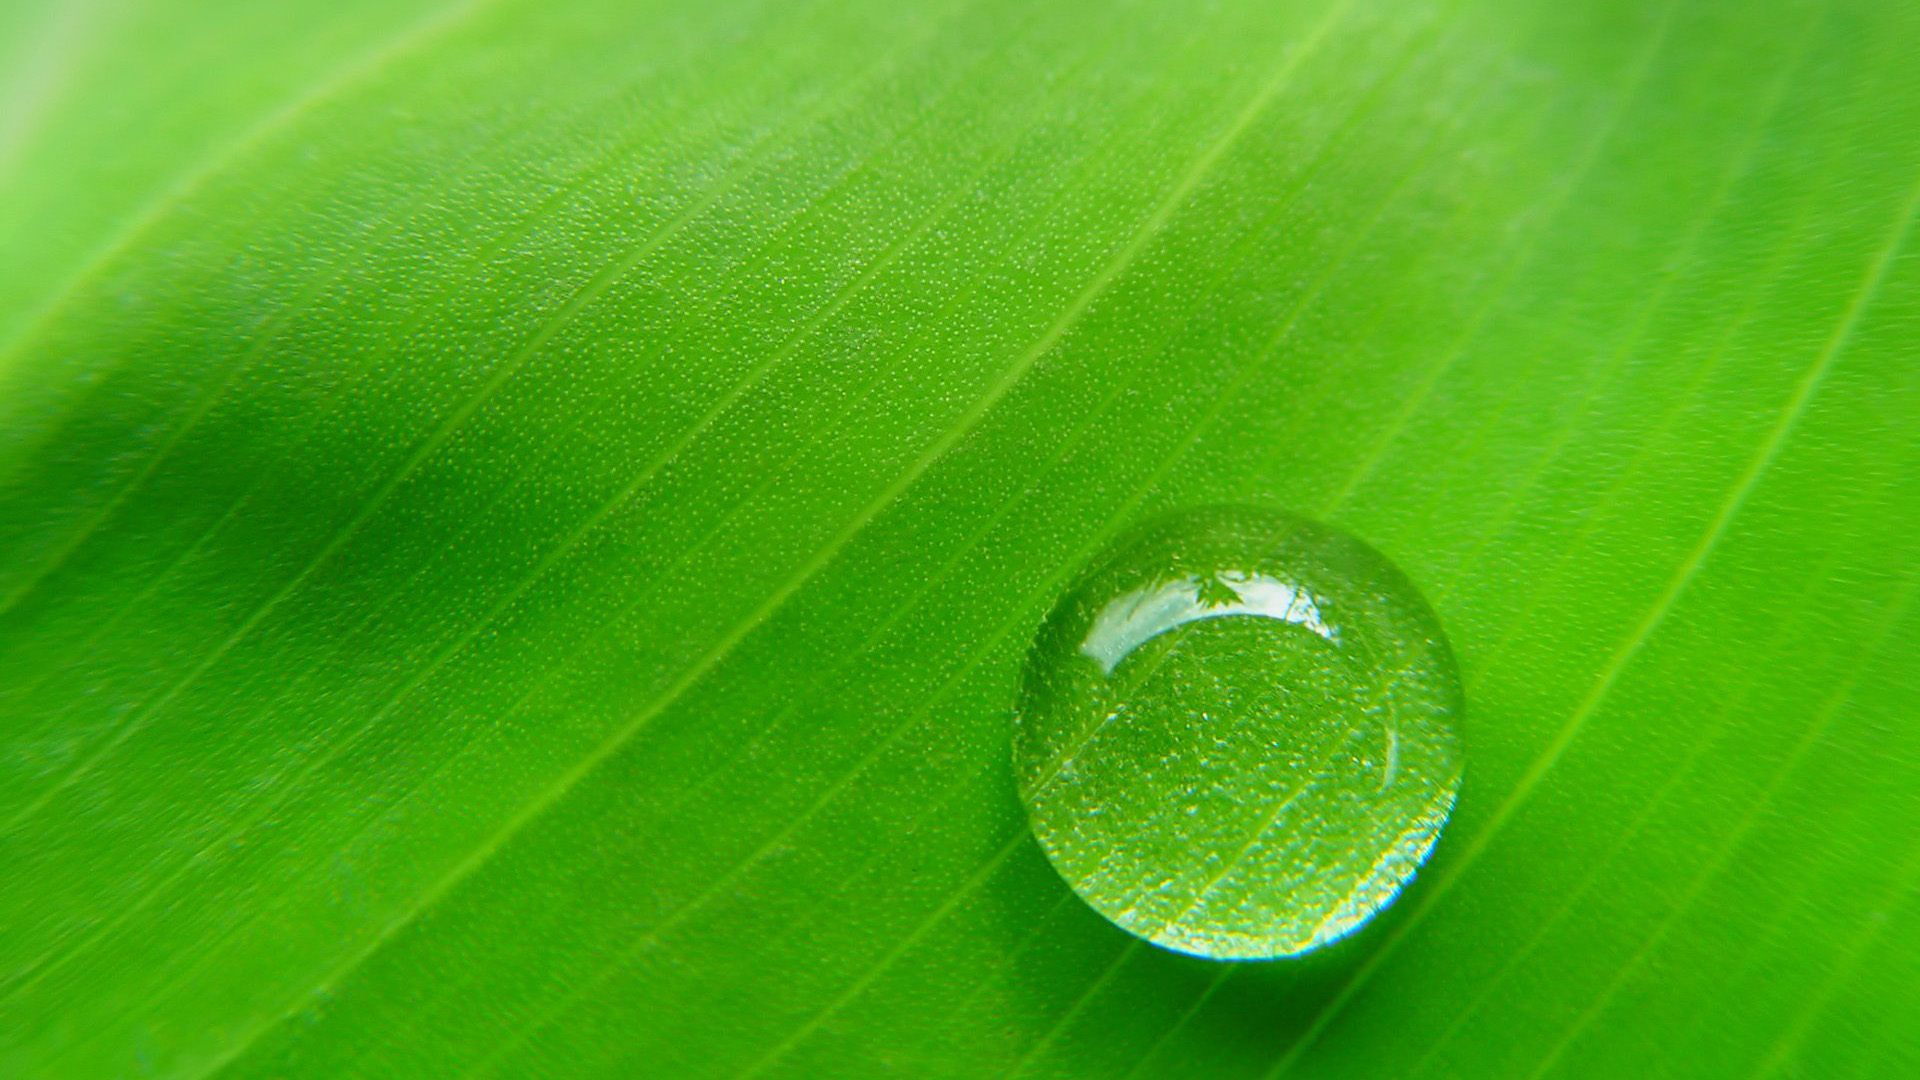 Macro crystal droplets 2 wallpapers, Green Backgrounds, Pictures ...